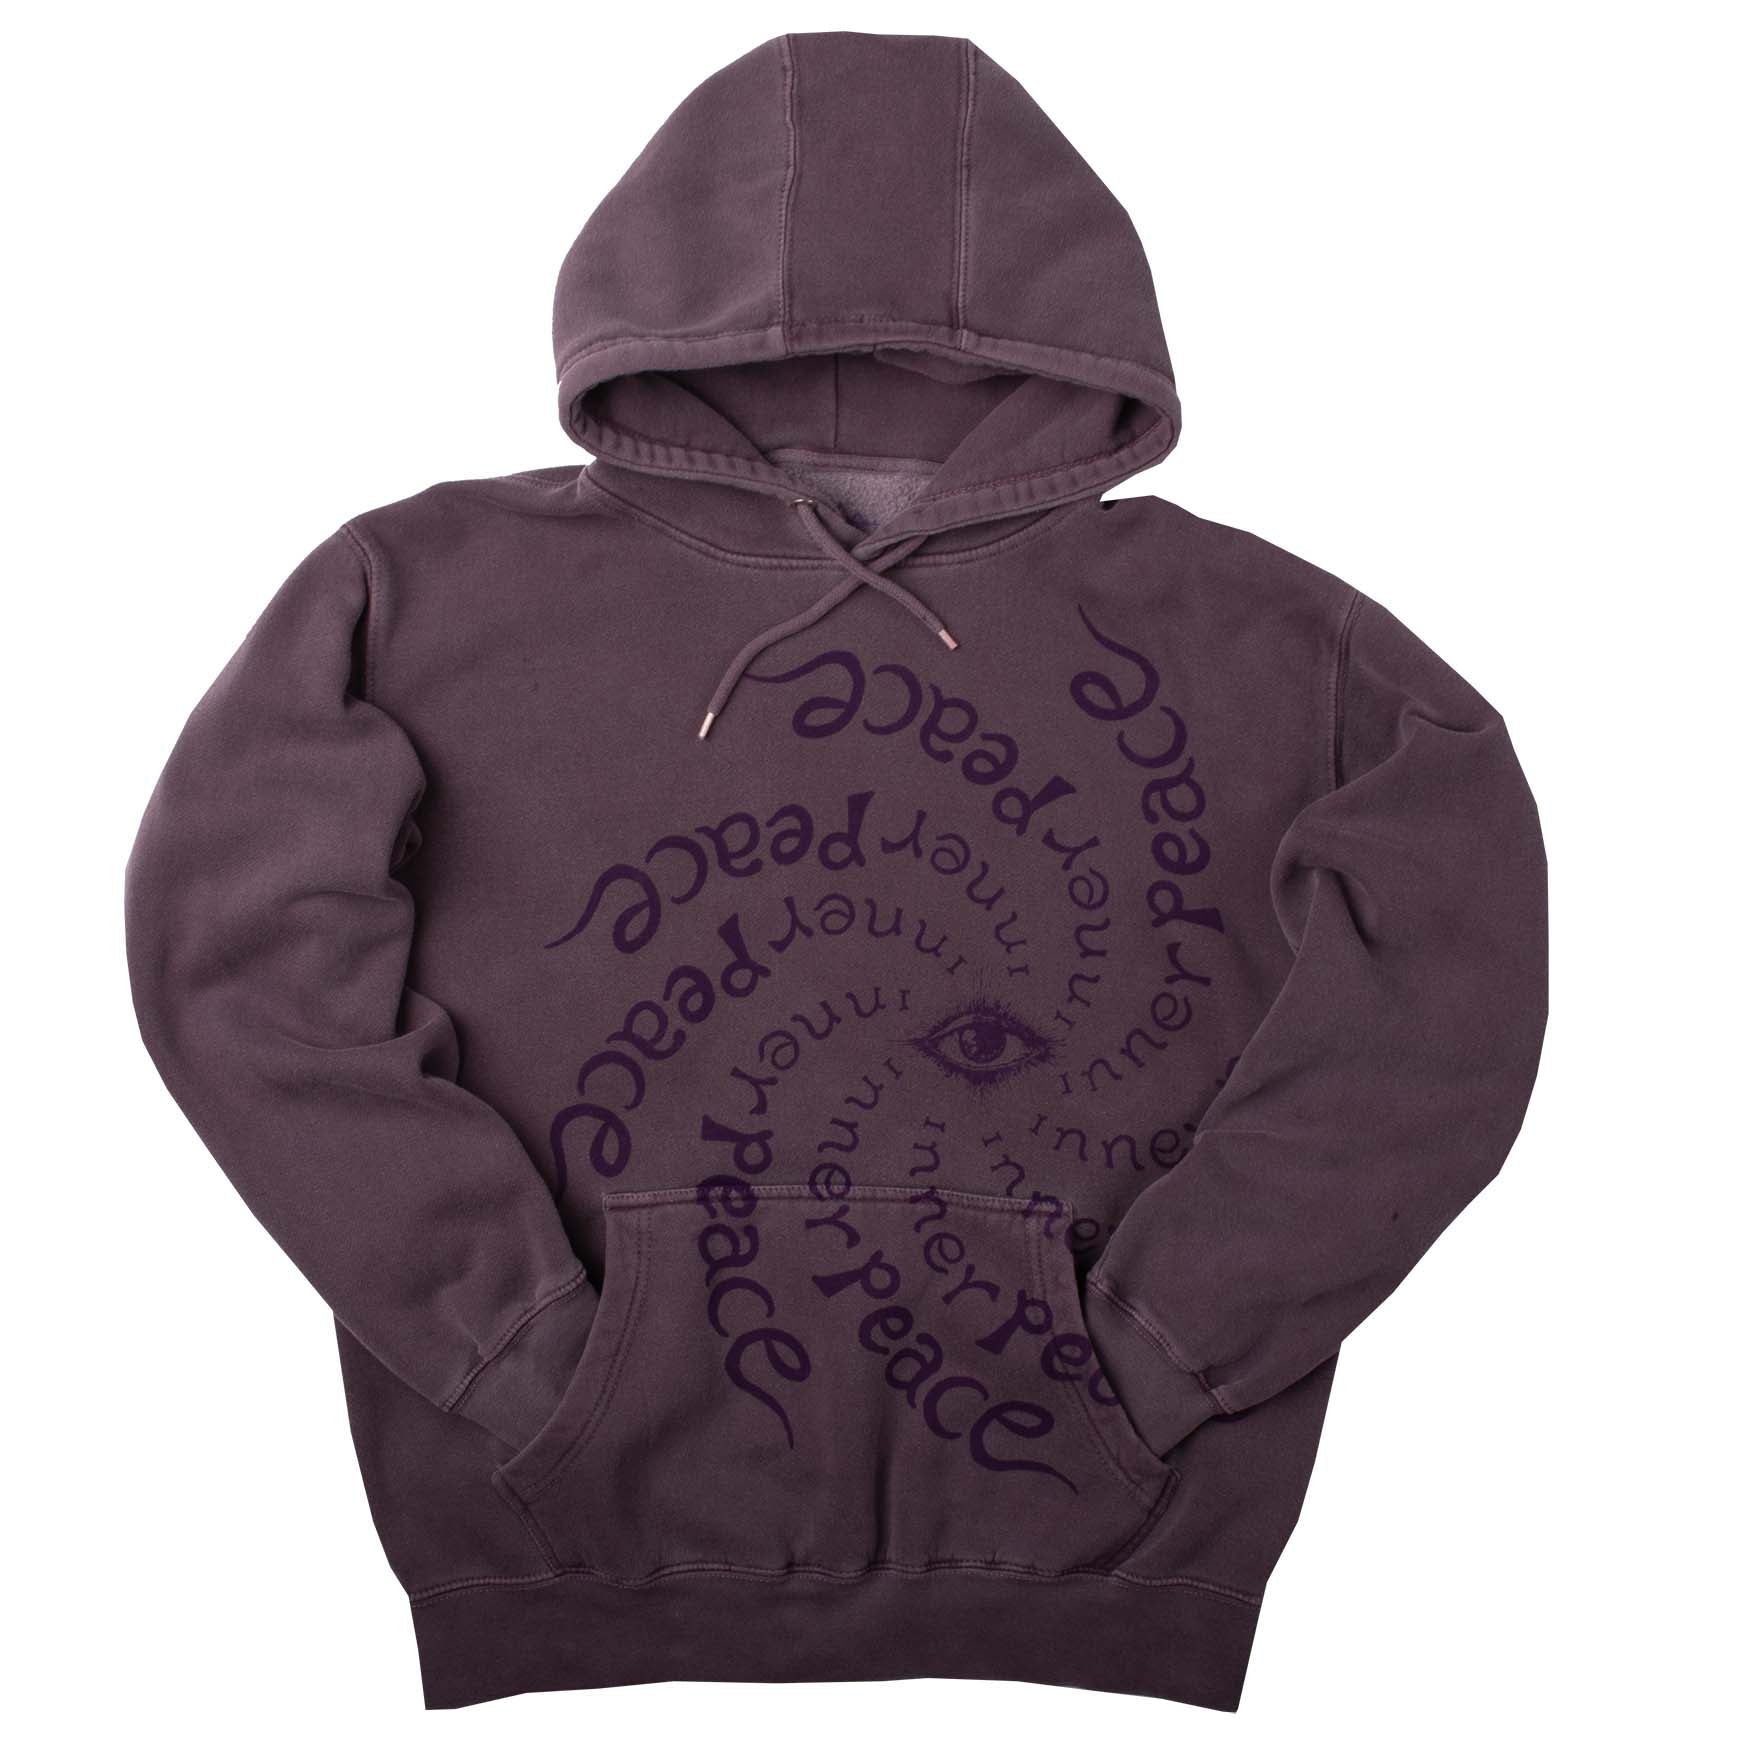 Full front photo Altru Inner Peace Dark Purple Hoodie. Garment dyed and washed for soft vintage look and feel,